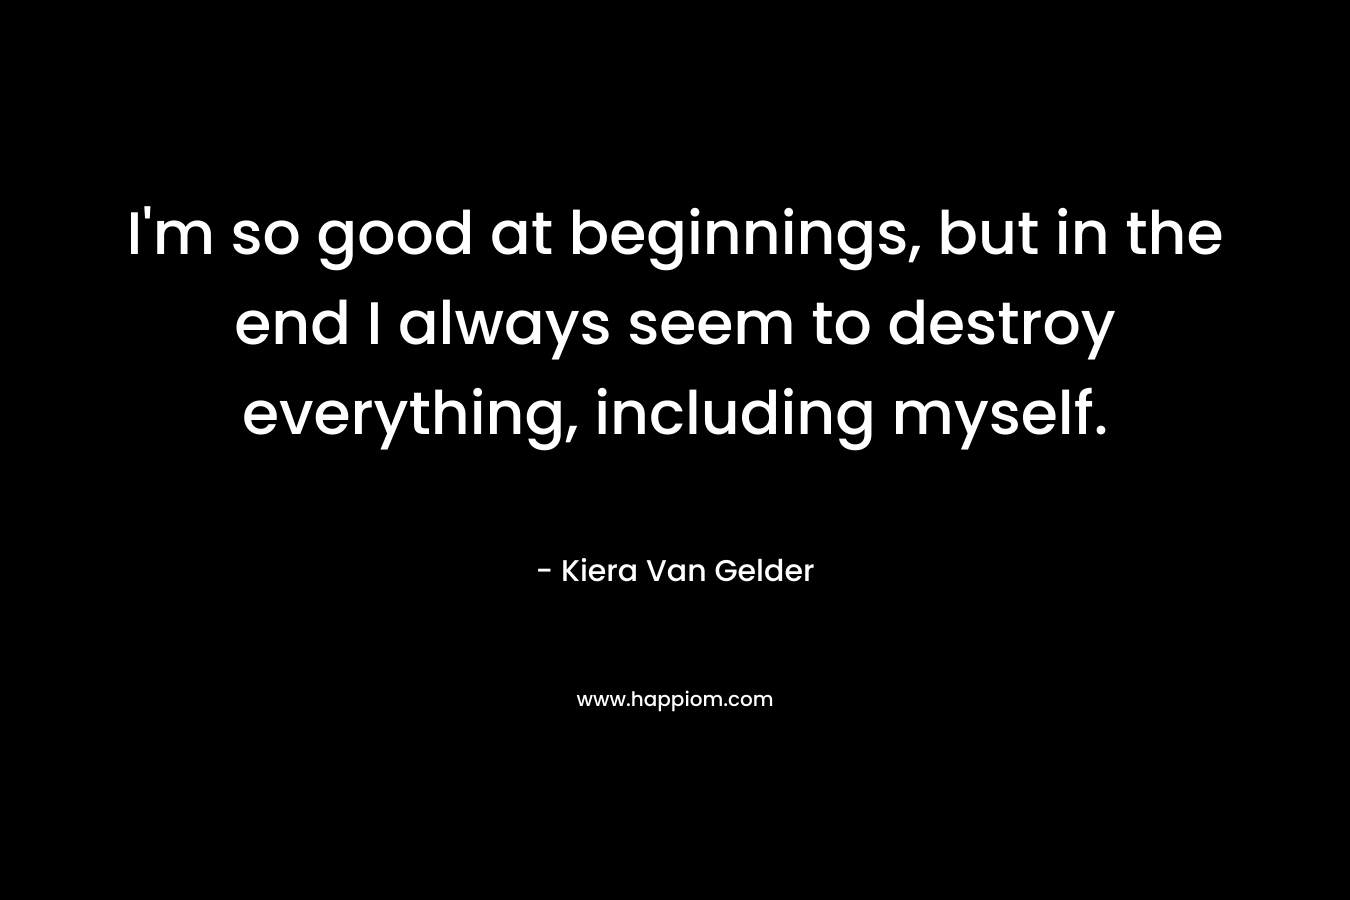 I'm so good at beginnings, but in the end I always seem to destroy everything, including myself.